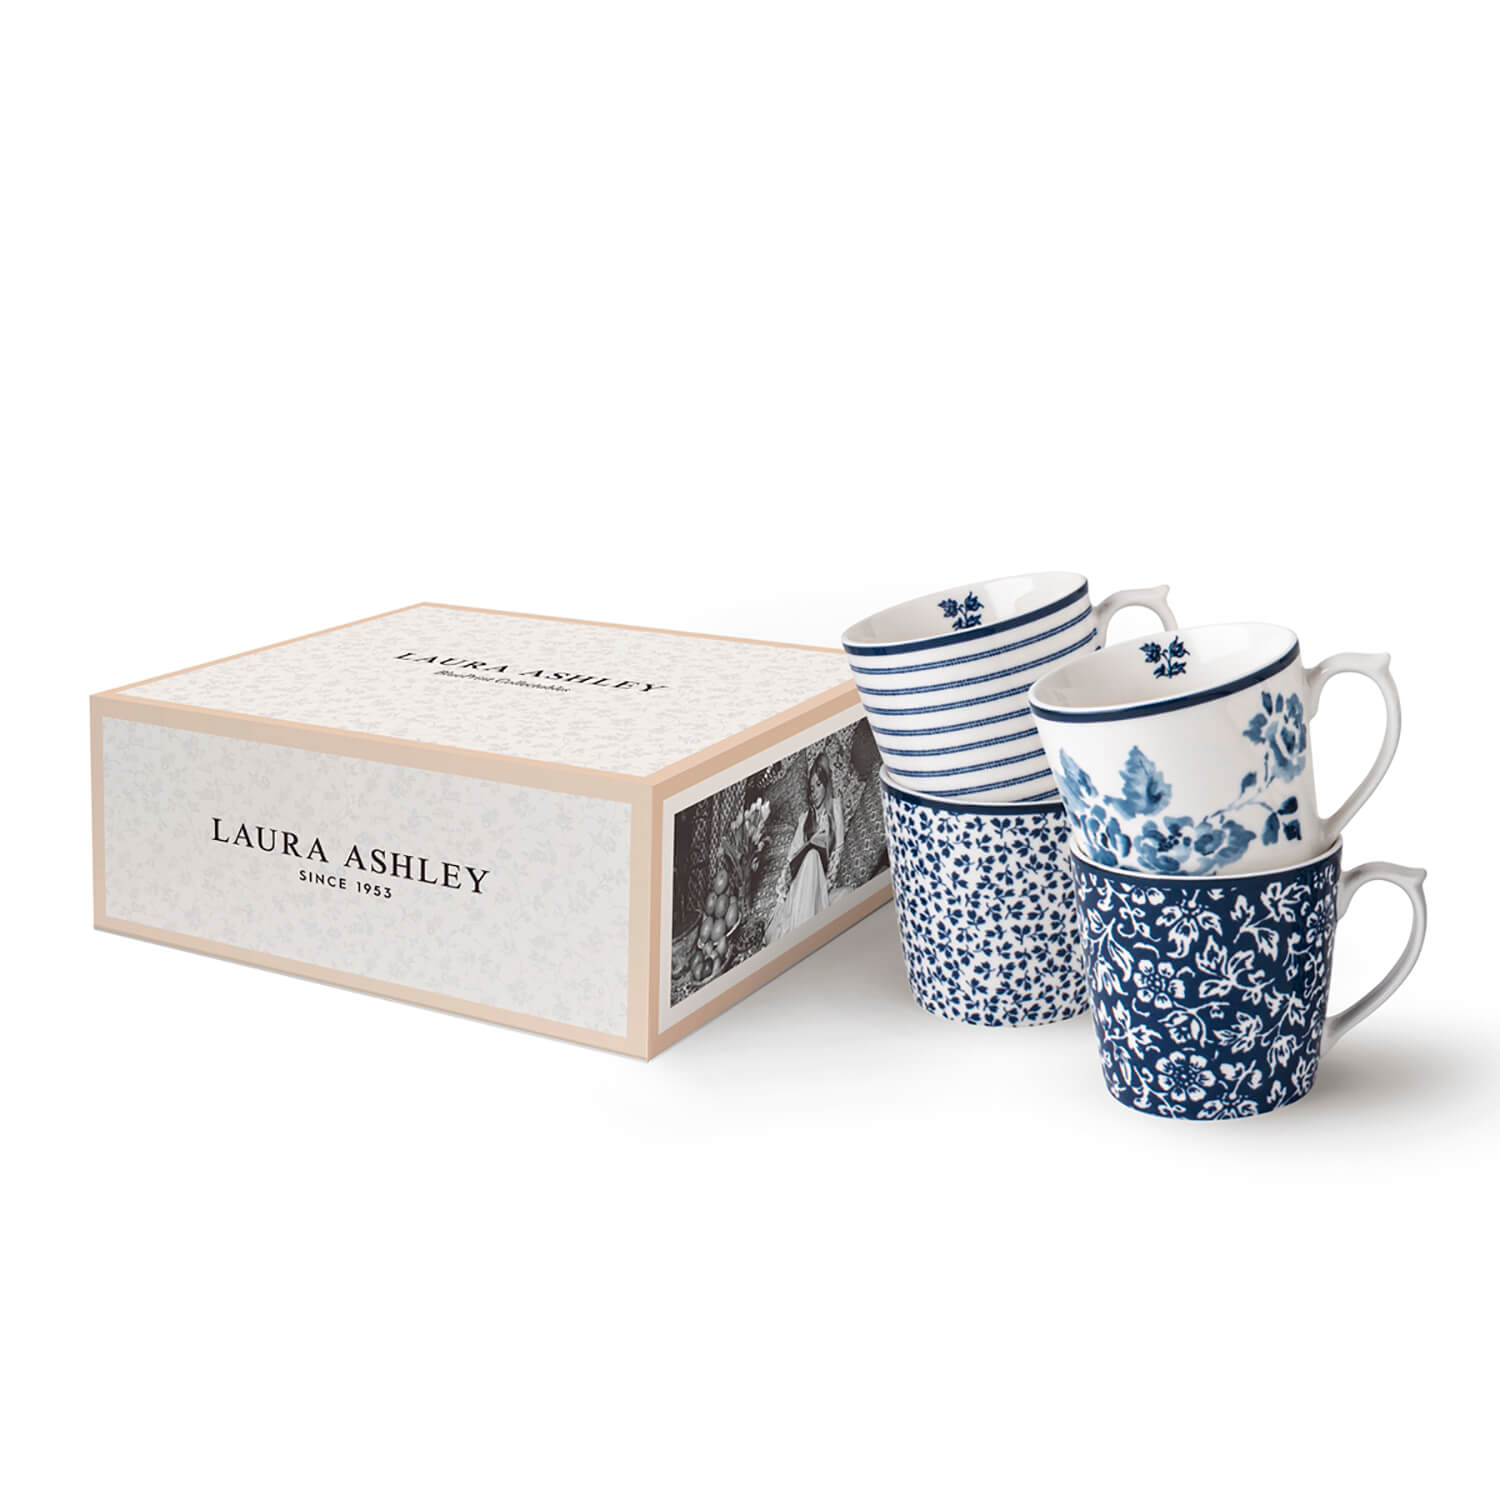 Laura Ashley Blueprint Collectables Set of 4 Mugs - 30cl - Multi 1 Shaws Department Stores